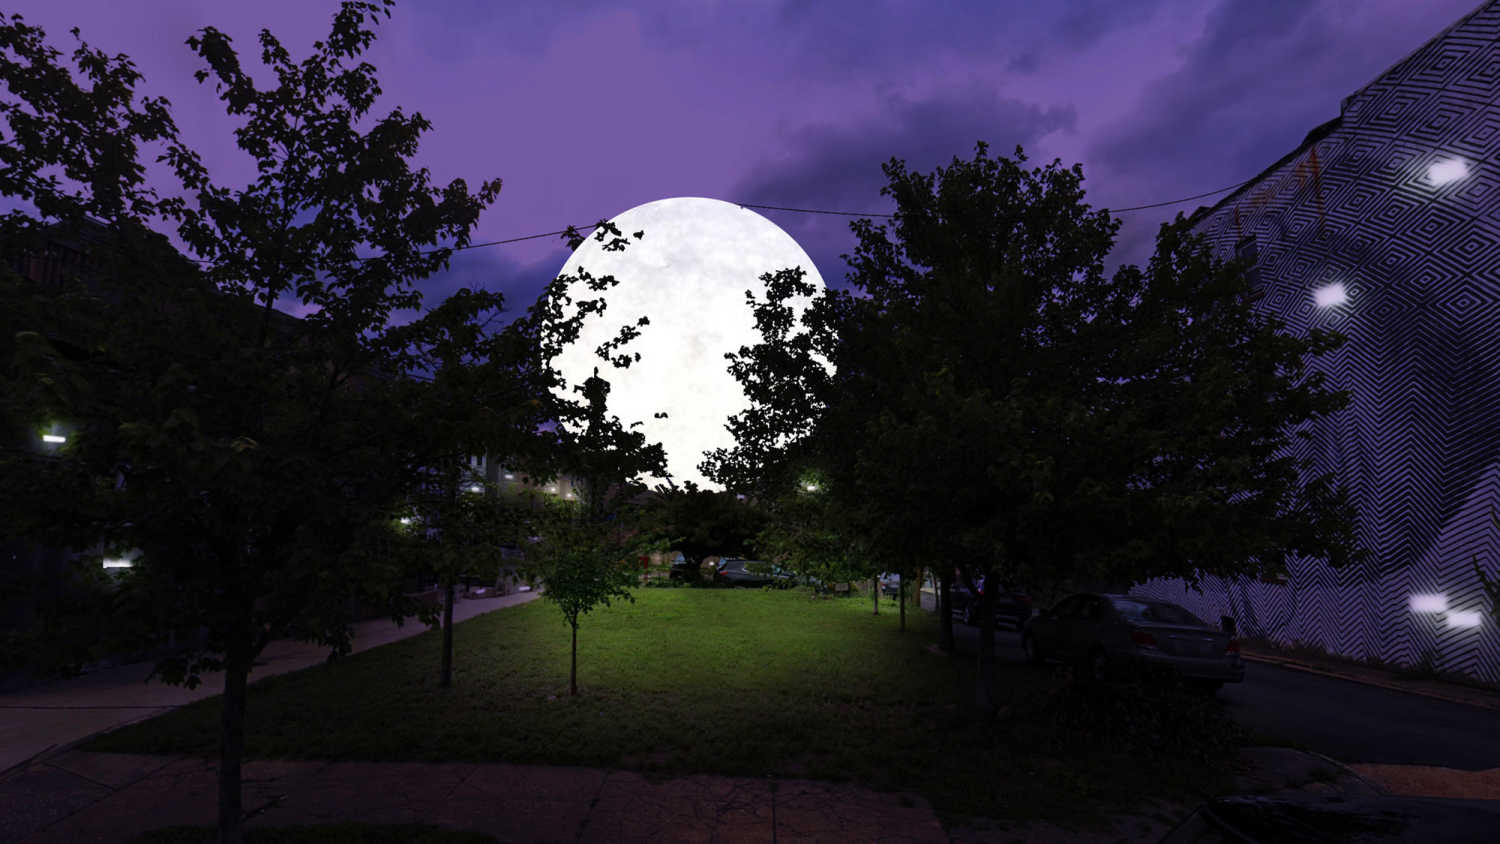 CONCEPT: BIG MOON (PI.KL STUDIO) Sculptural lighting such as this large, glowing orb could be
used to activate the many pocket parks across the District, while providing unique illumination that accentuates the character of the area.